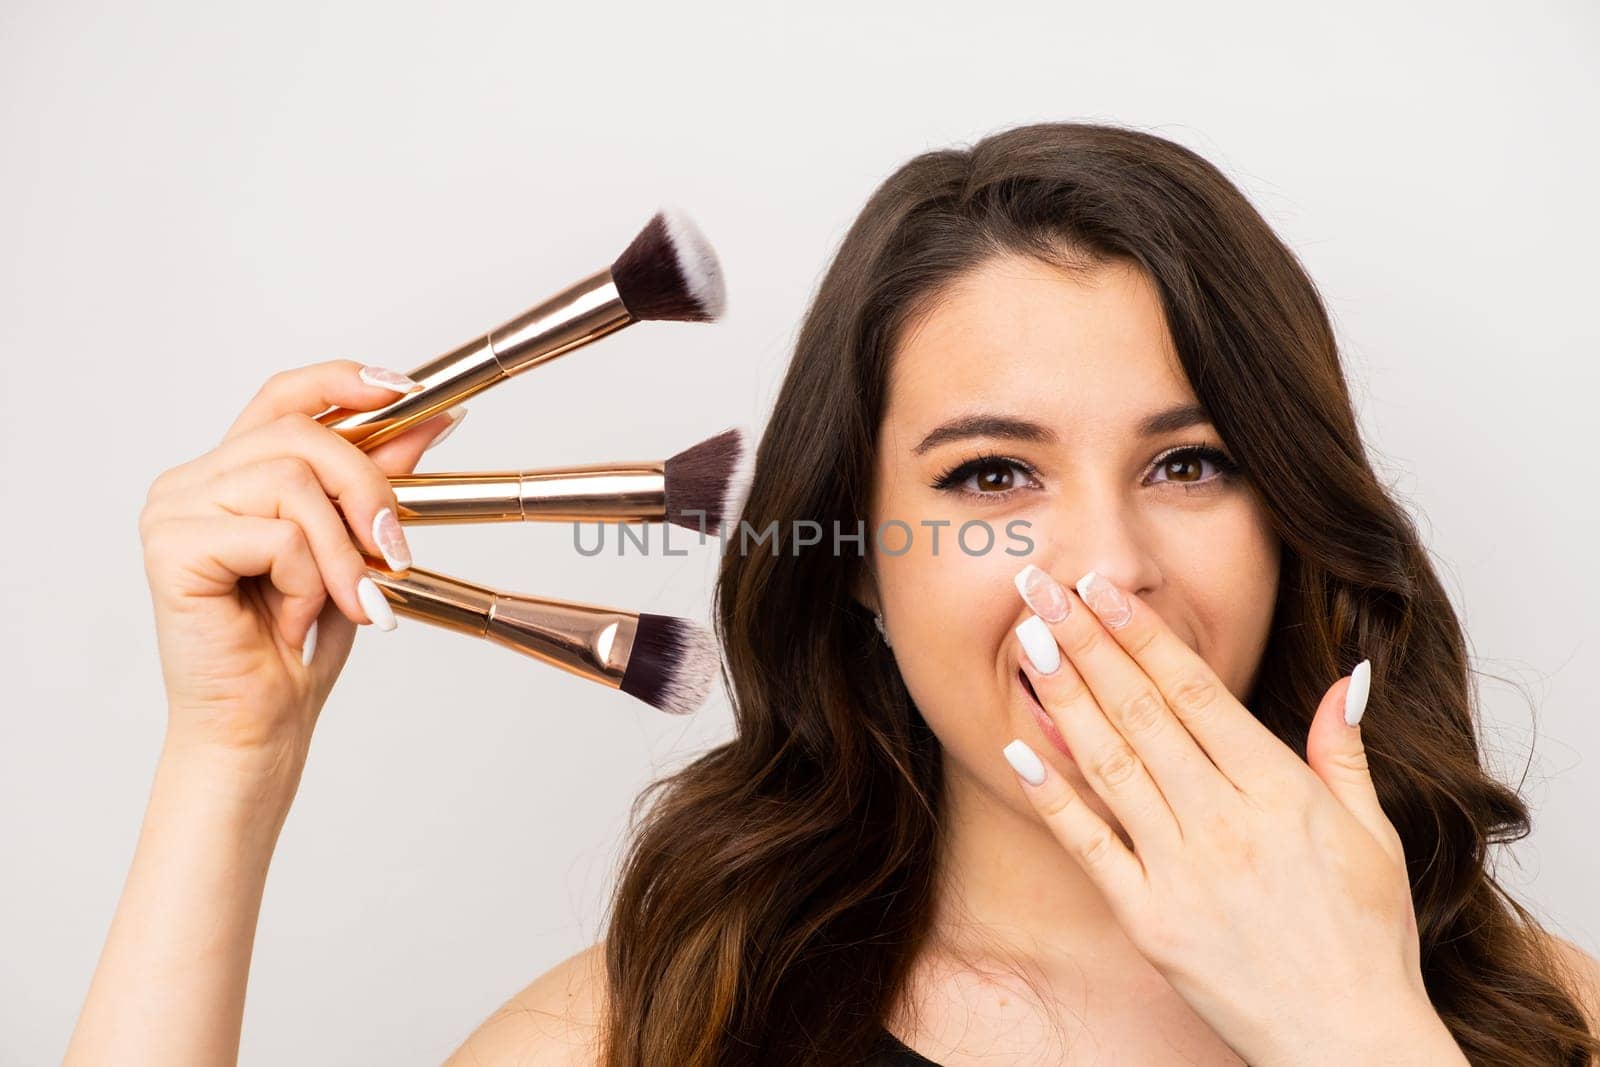 An exciting model with cosmetic brushes on a grey background. Makeup artist with professional tools.